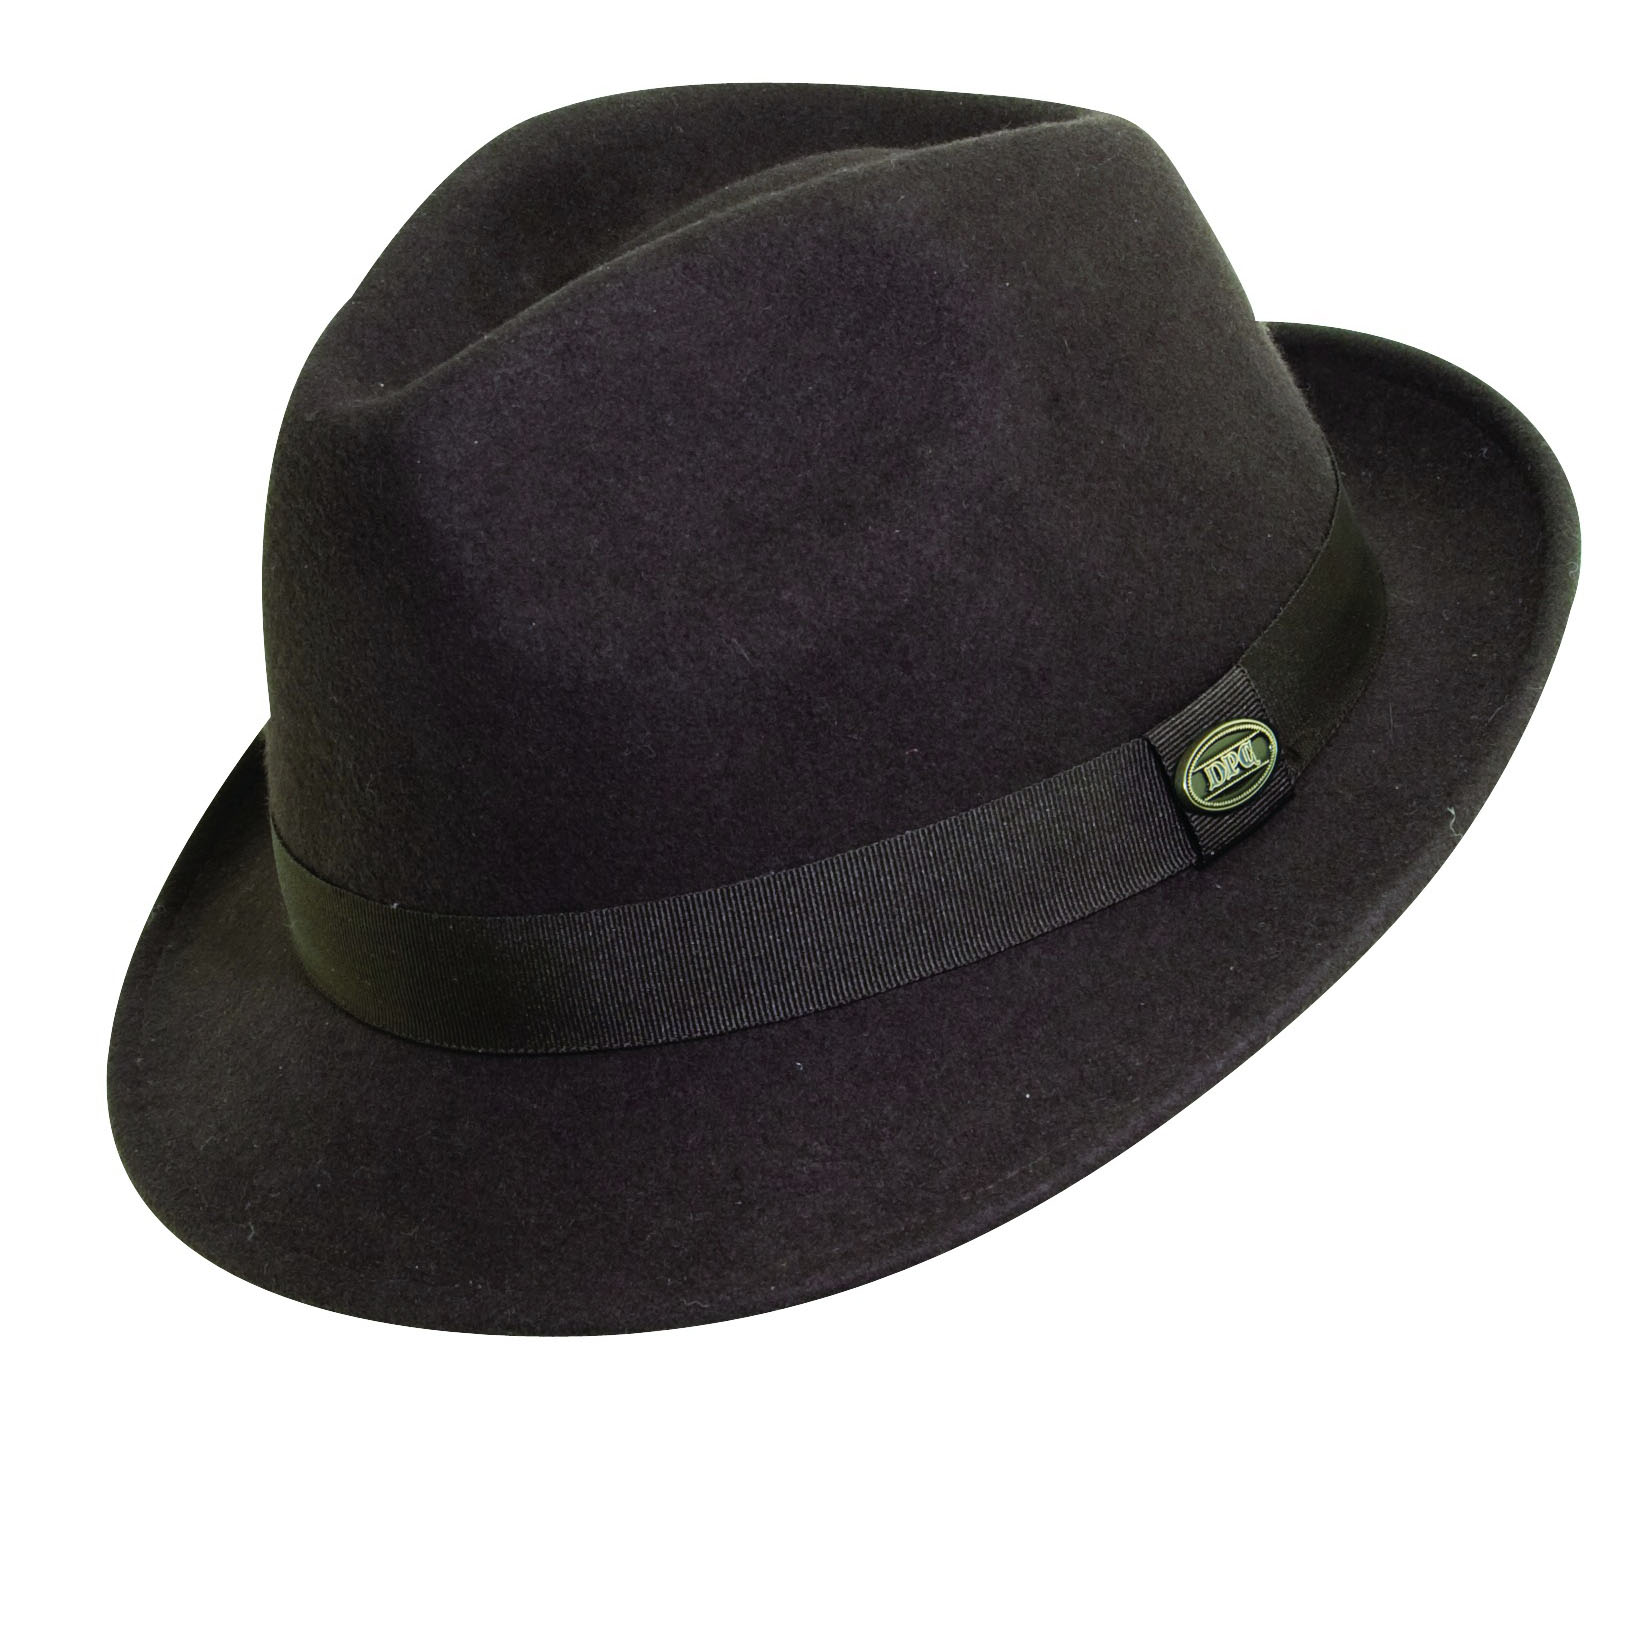 Related Pictures The Fedora Hat Popular In The Roaring Twenties Is The    